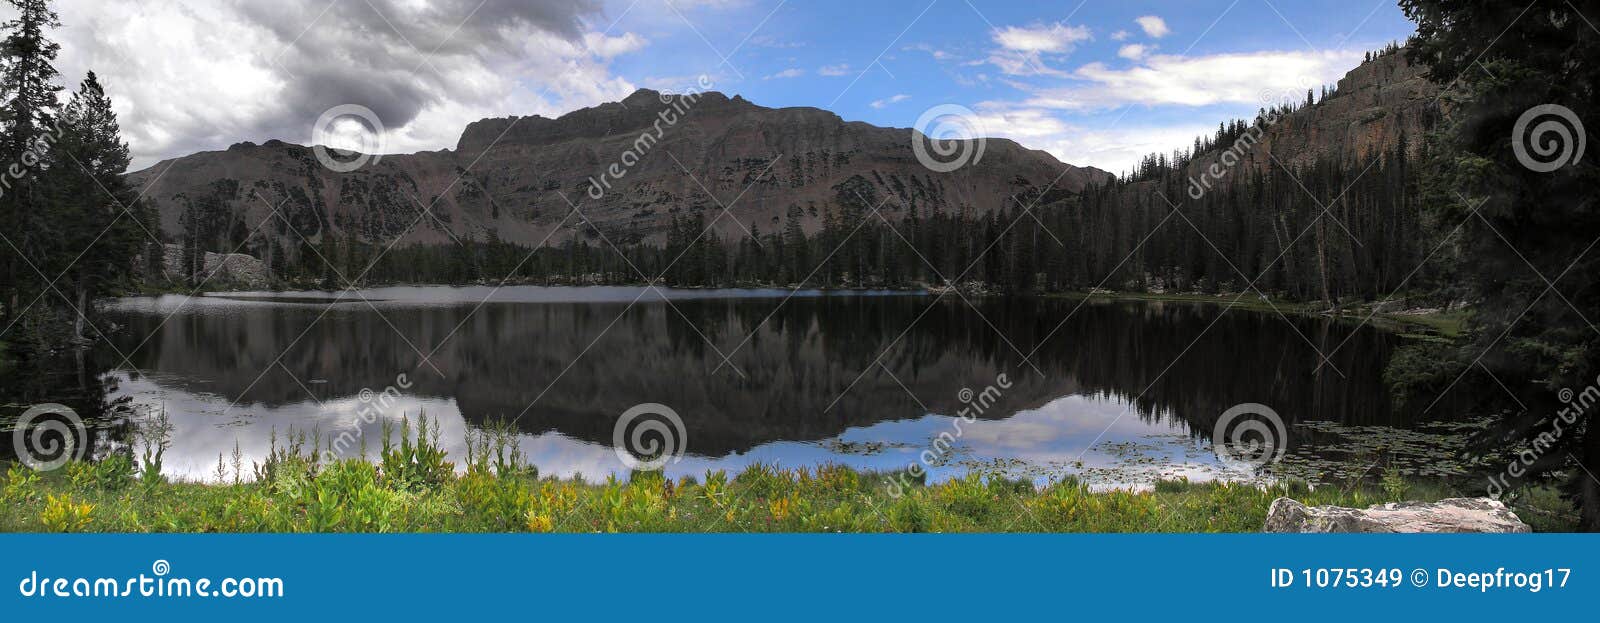 Mountain Reflection Panoramic Stock Image - Image of immense, colossal ...